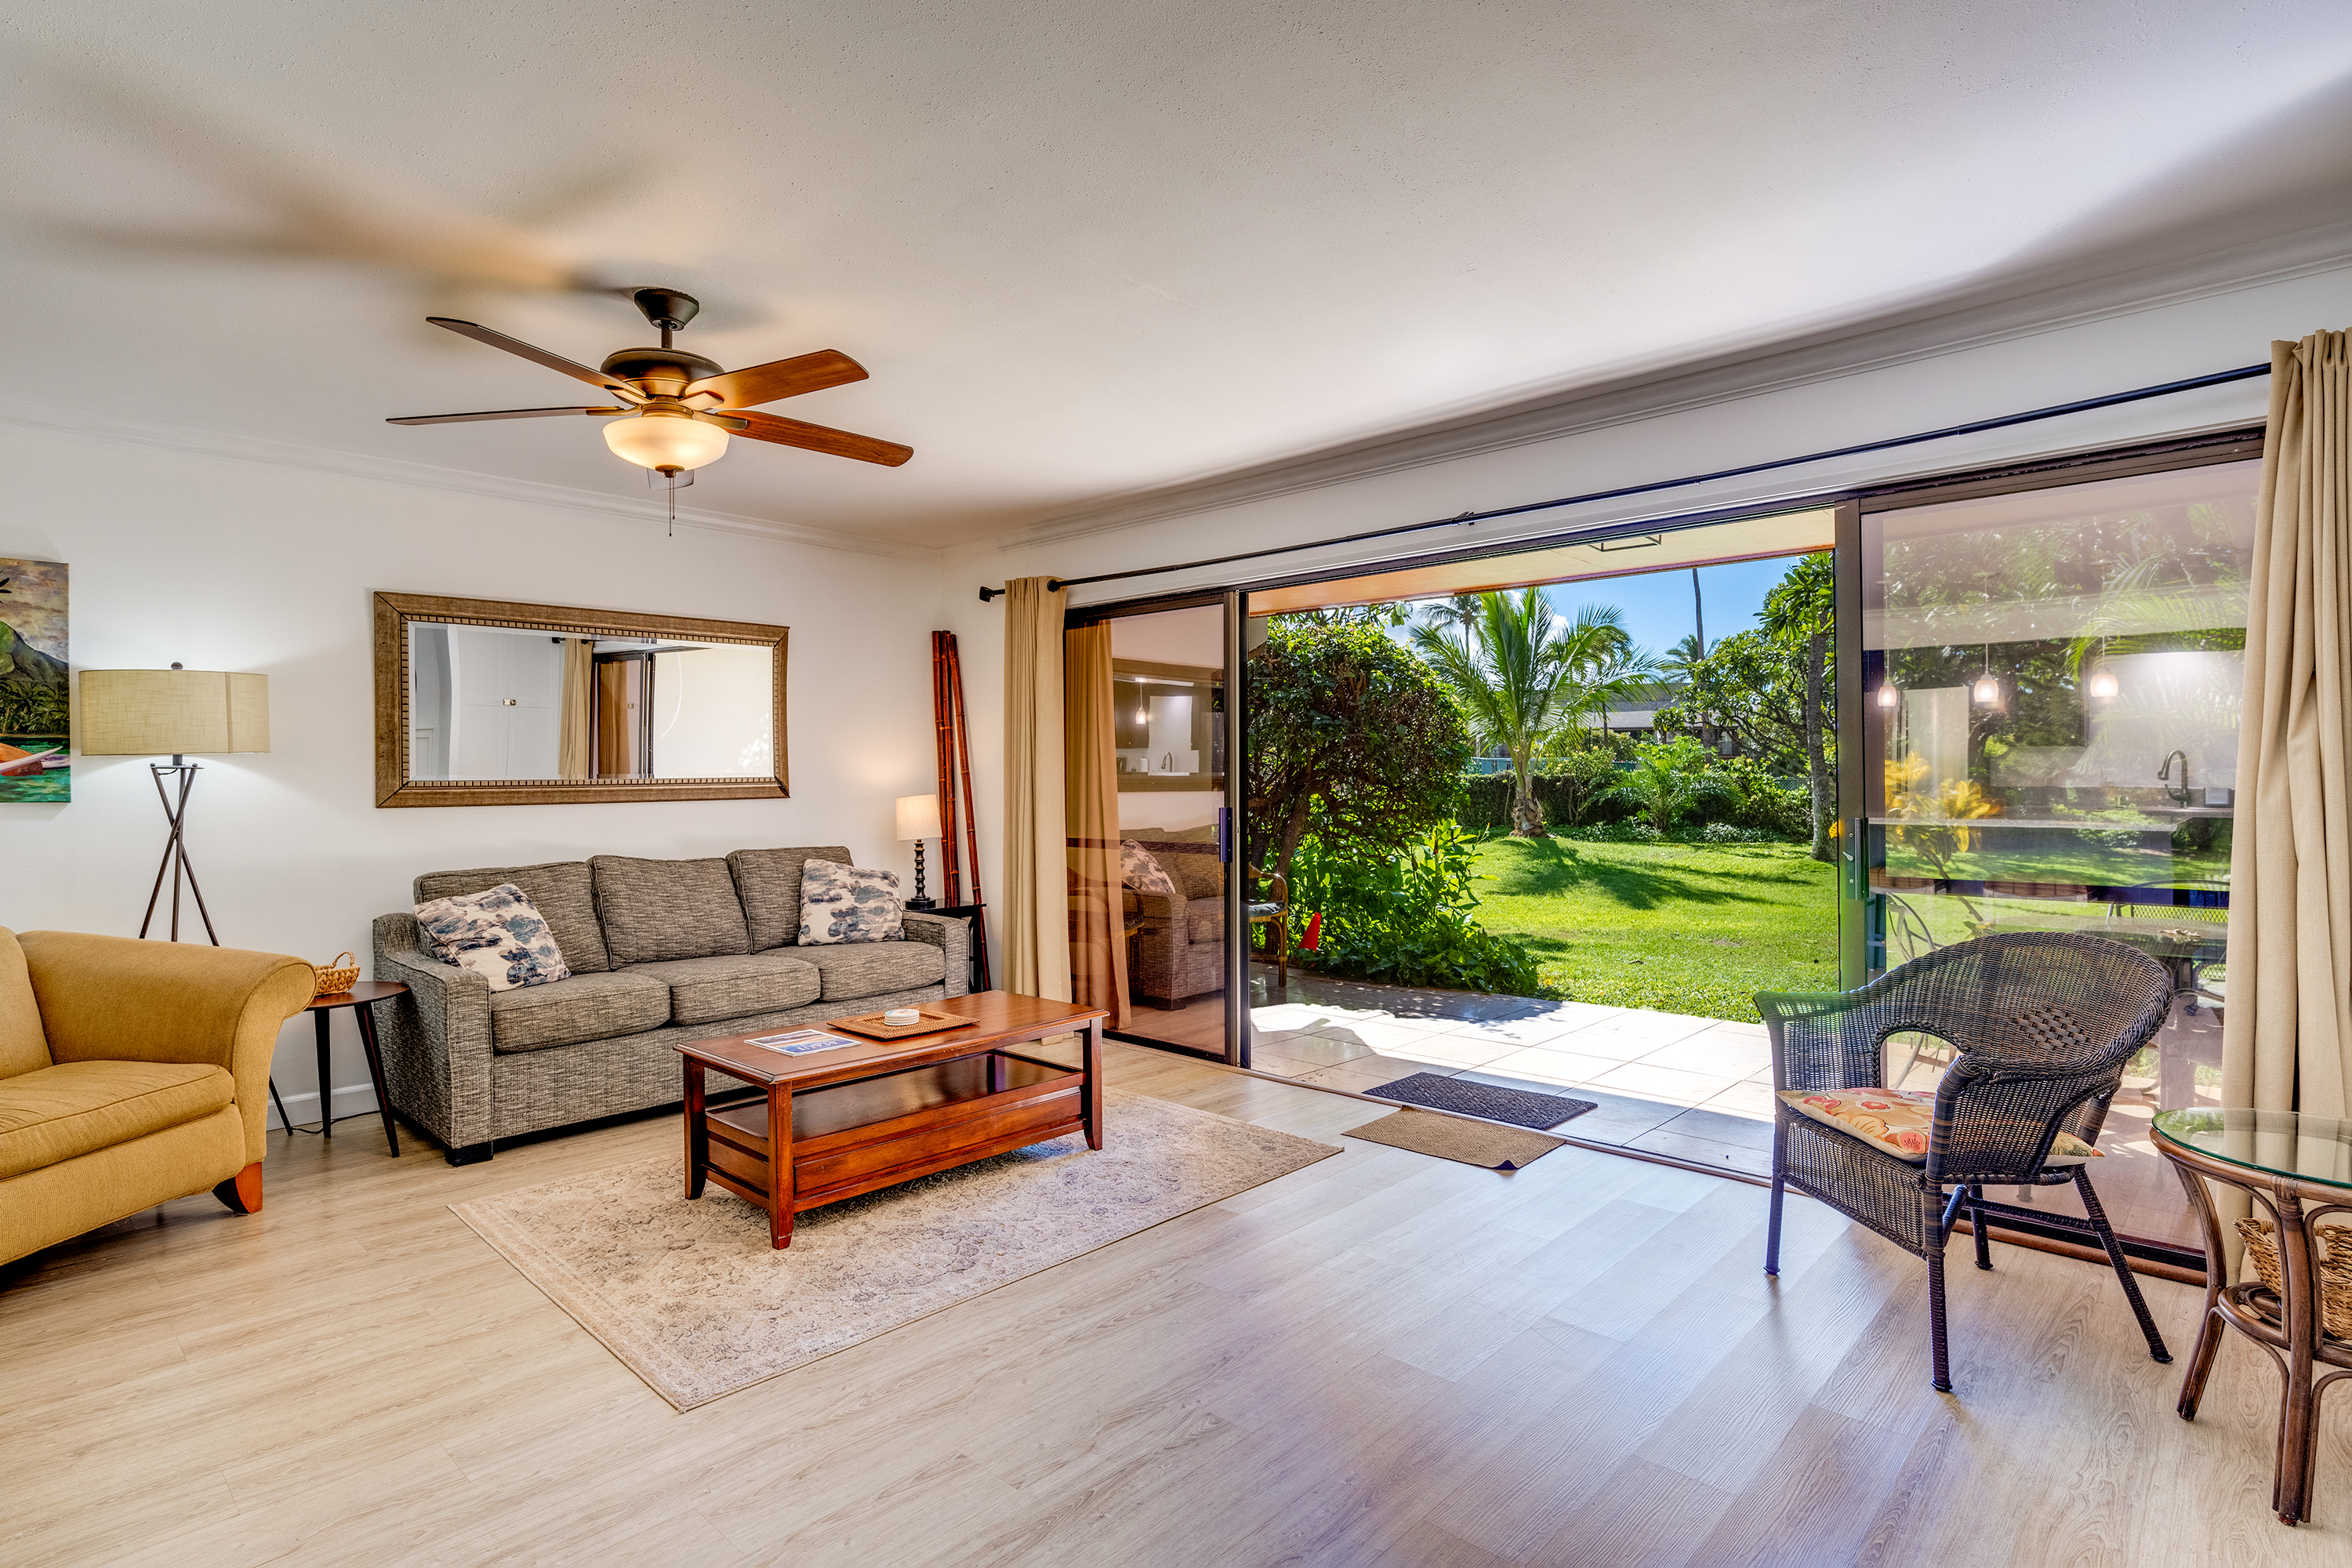 Seamless indoor-outdoor living with the lanai that connects to garden area and the pool, just steps away.